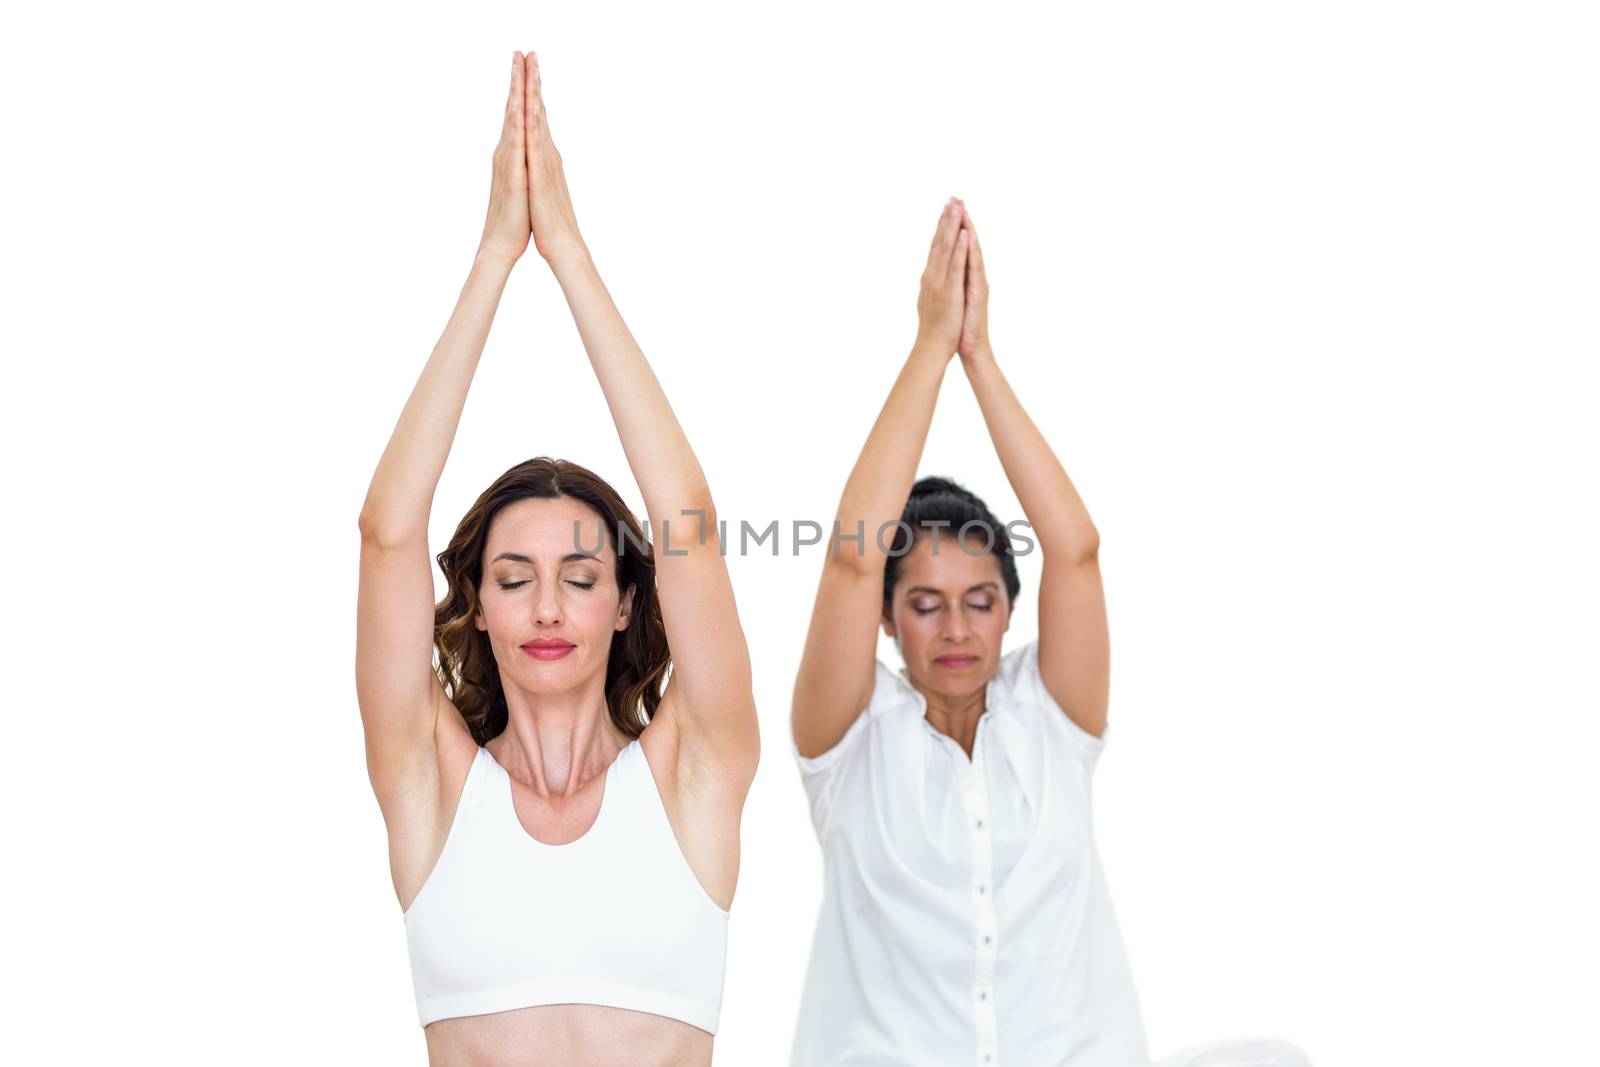 Relaxed women raising arms on white background